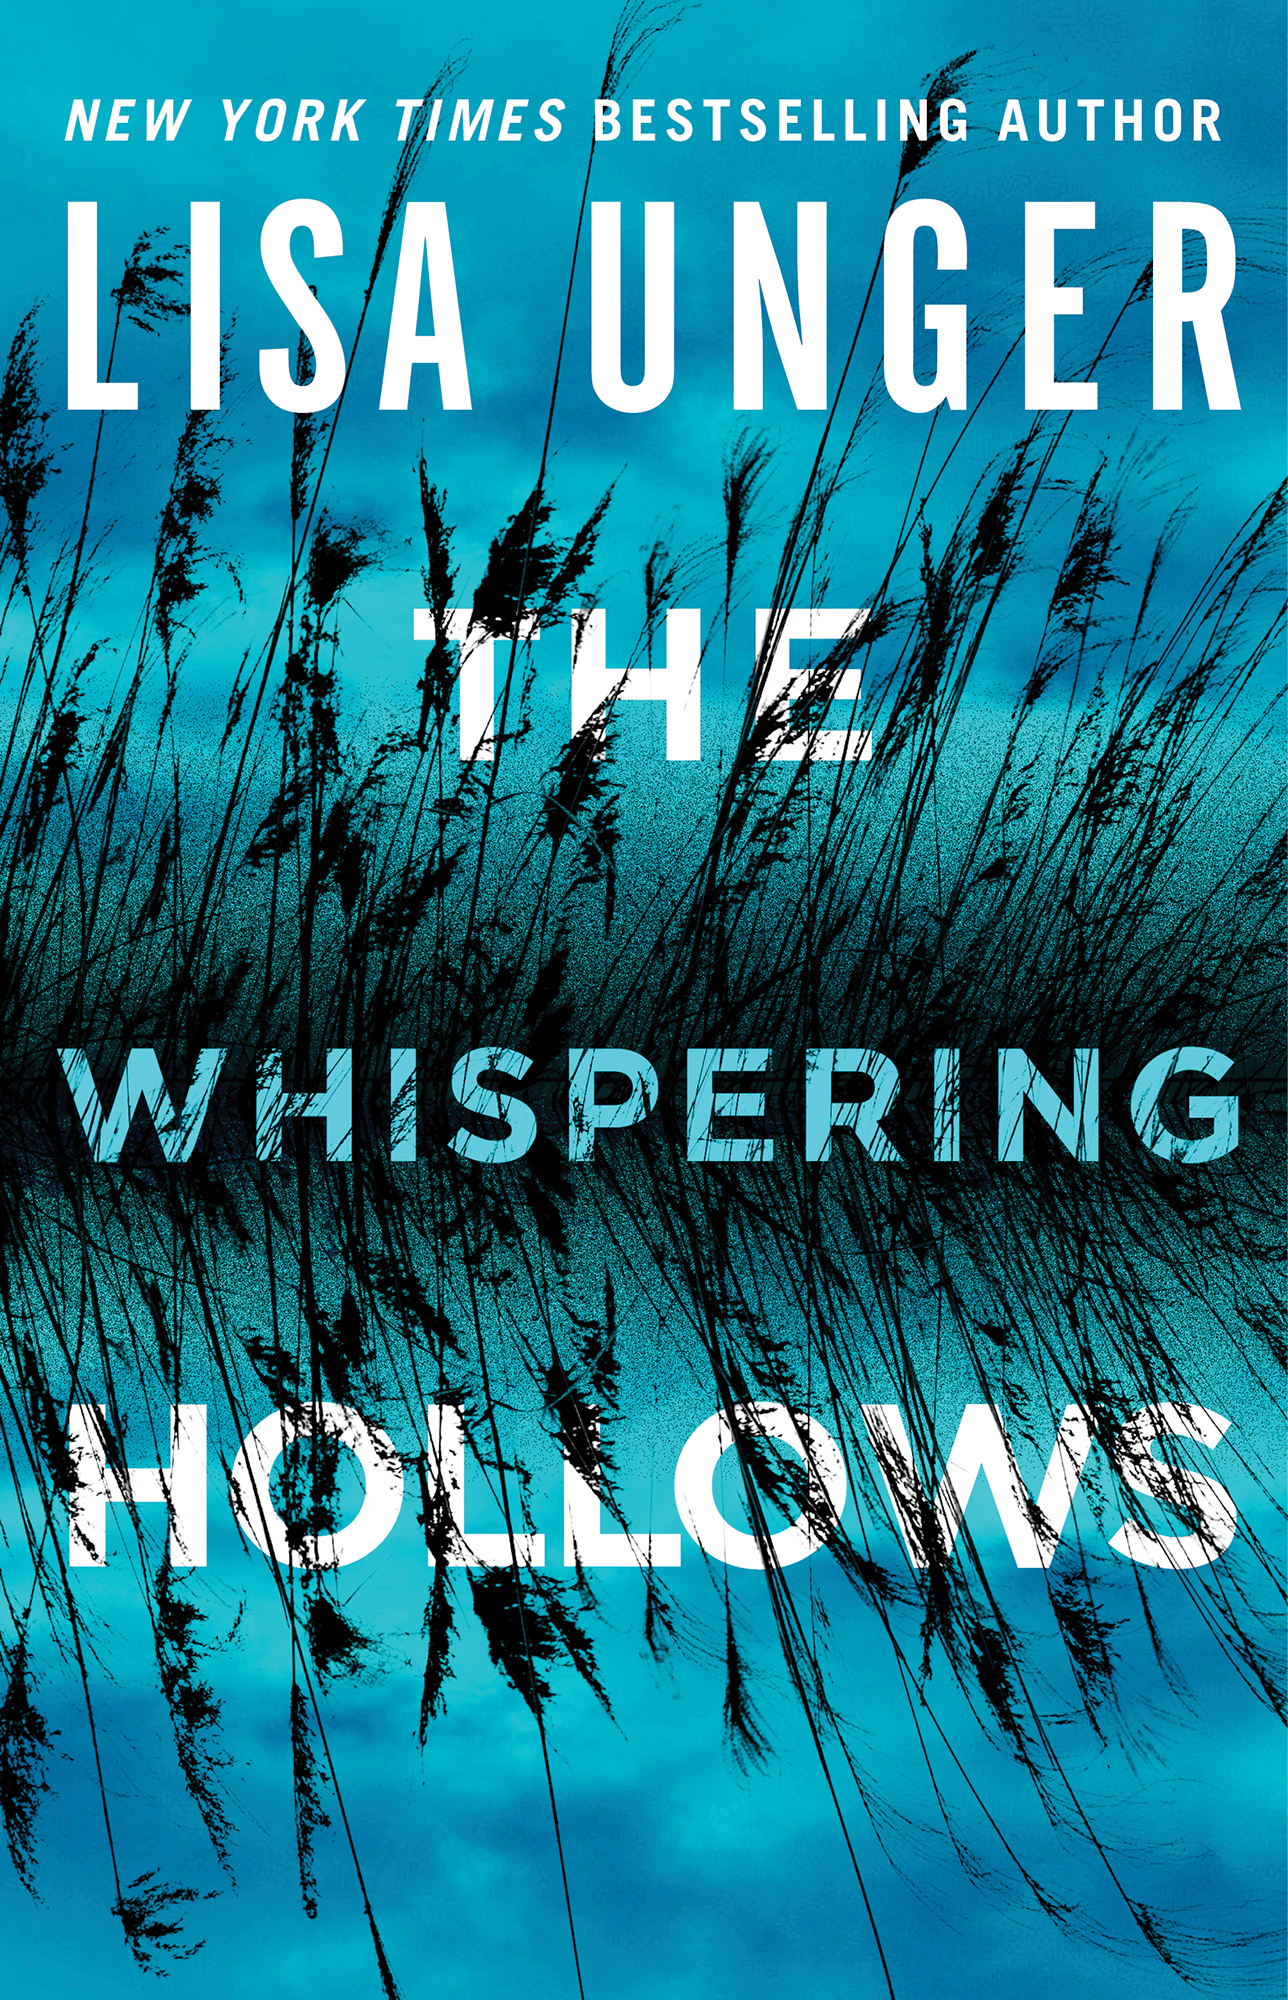 The Whispering Hollows by Lisa Unger